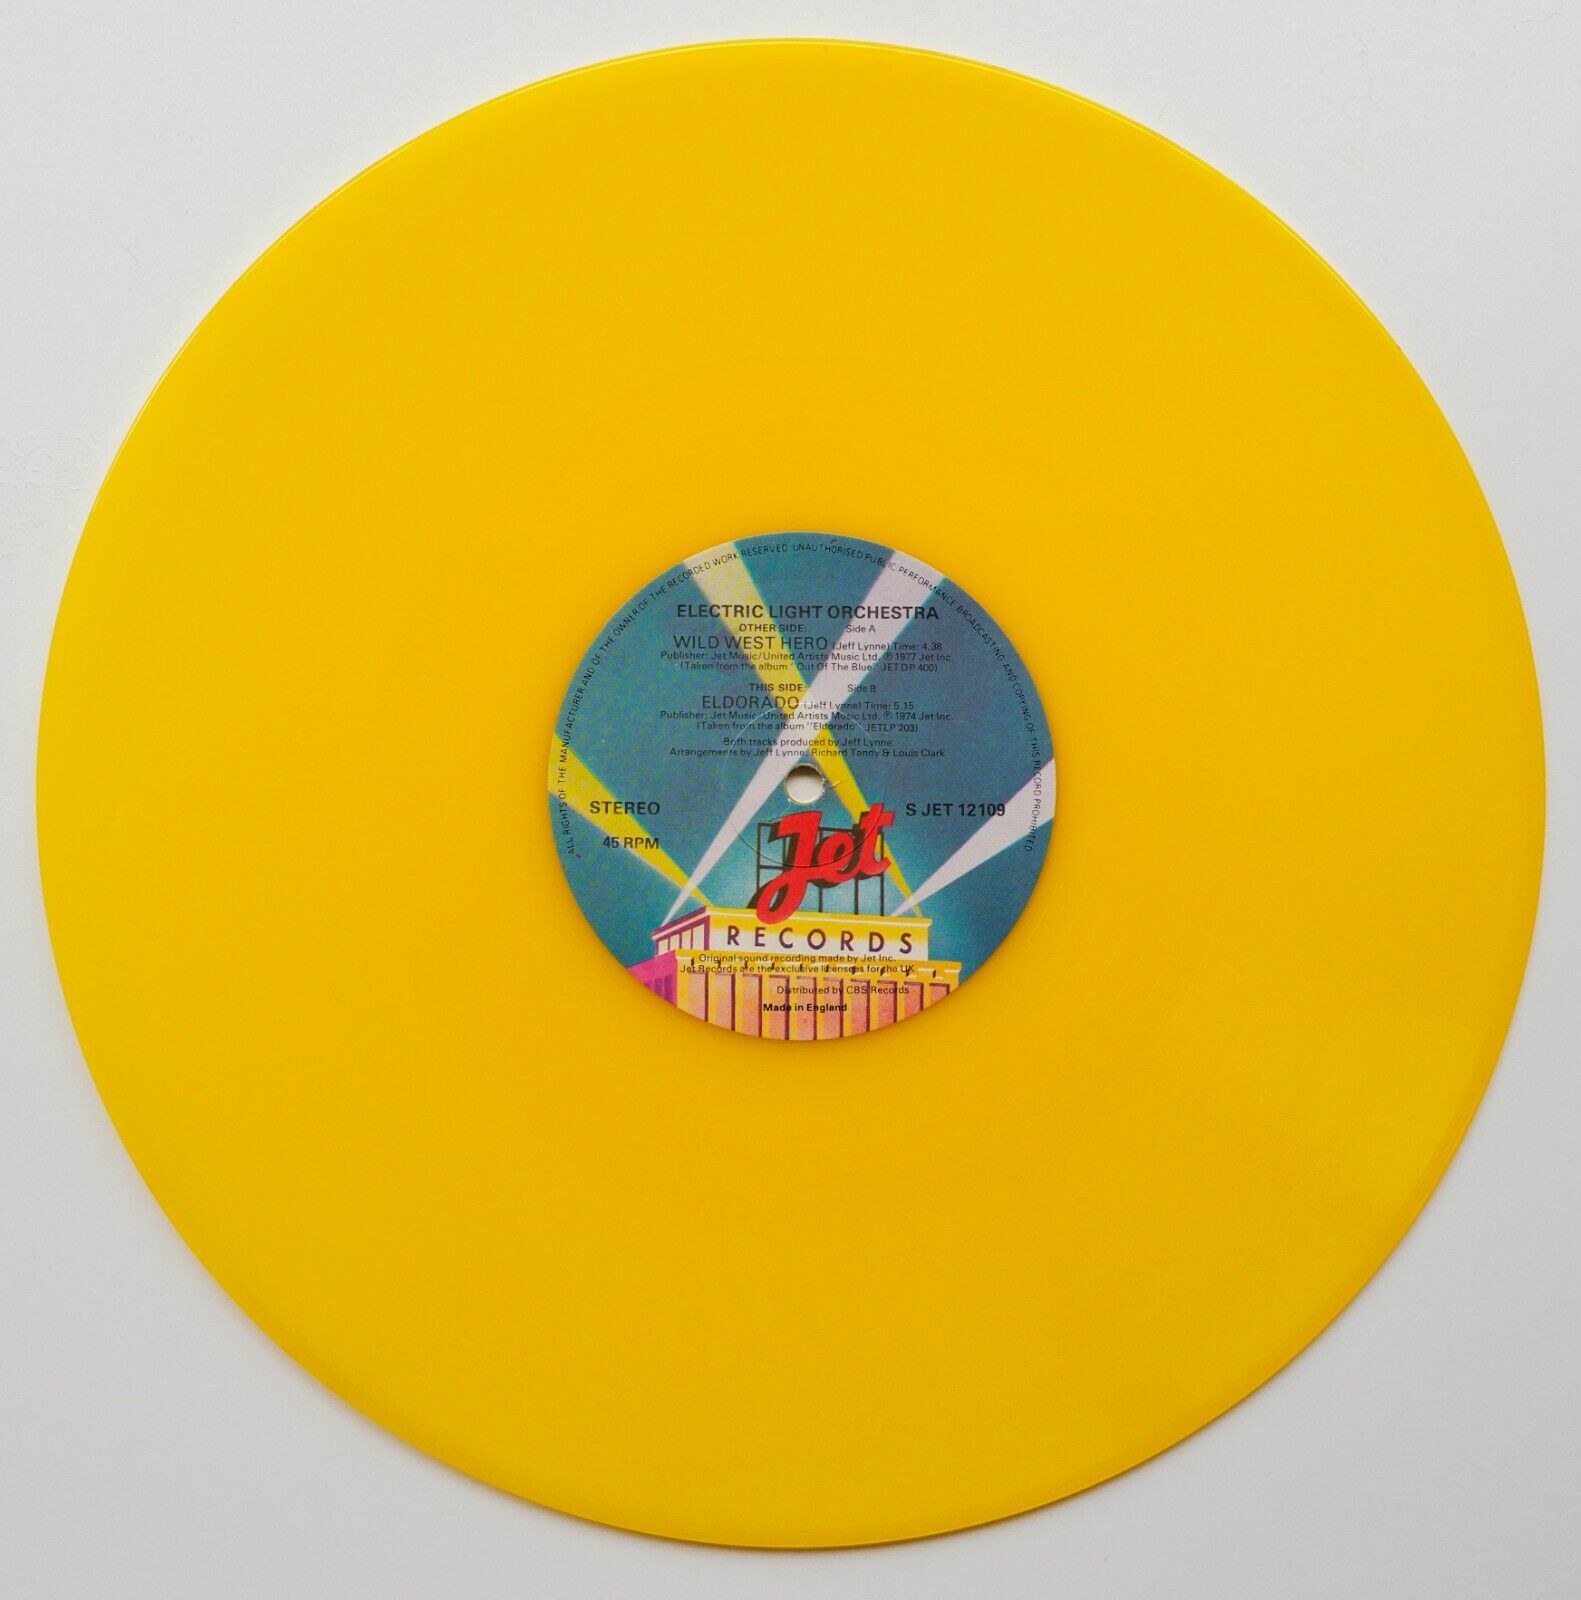 popsike.com - Electric Light Orchestra - ELO Wild West Hero, Yellow Vinyl  12" - UK pressing - auction details